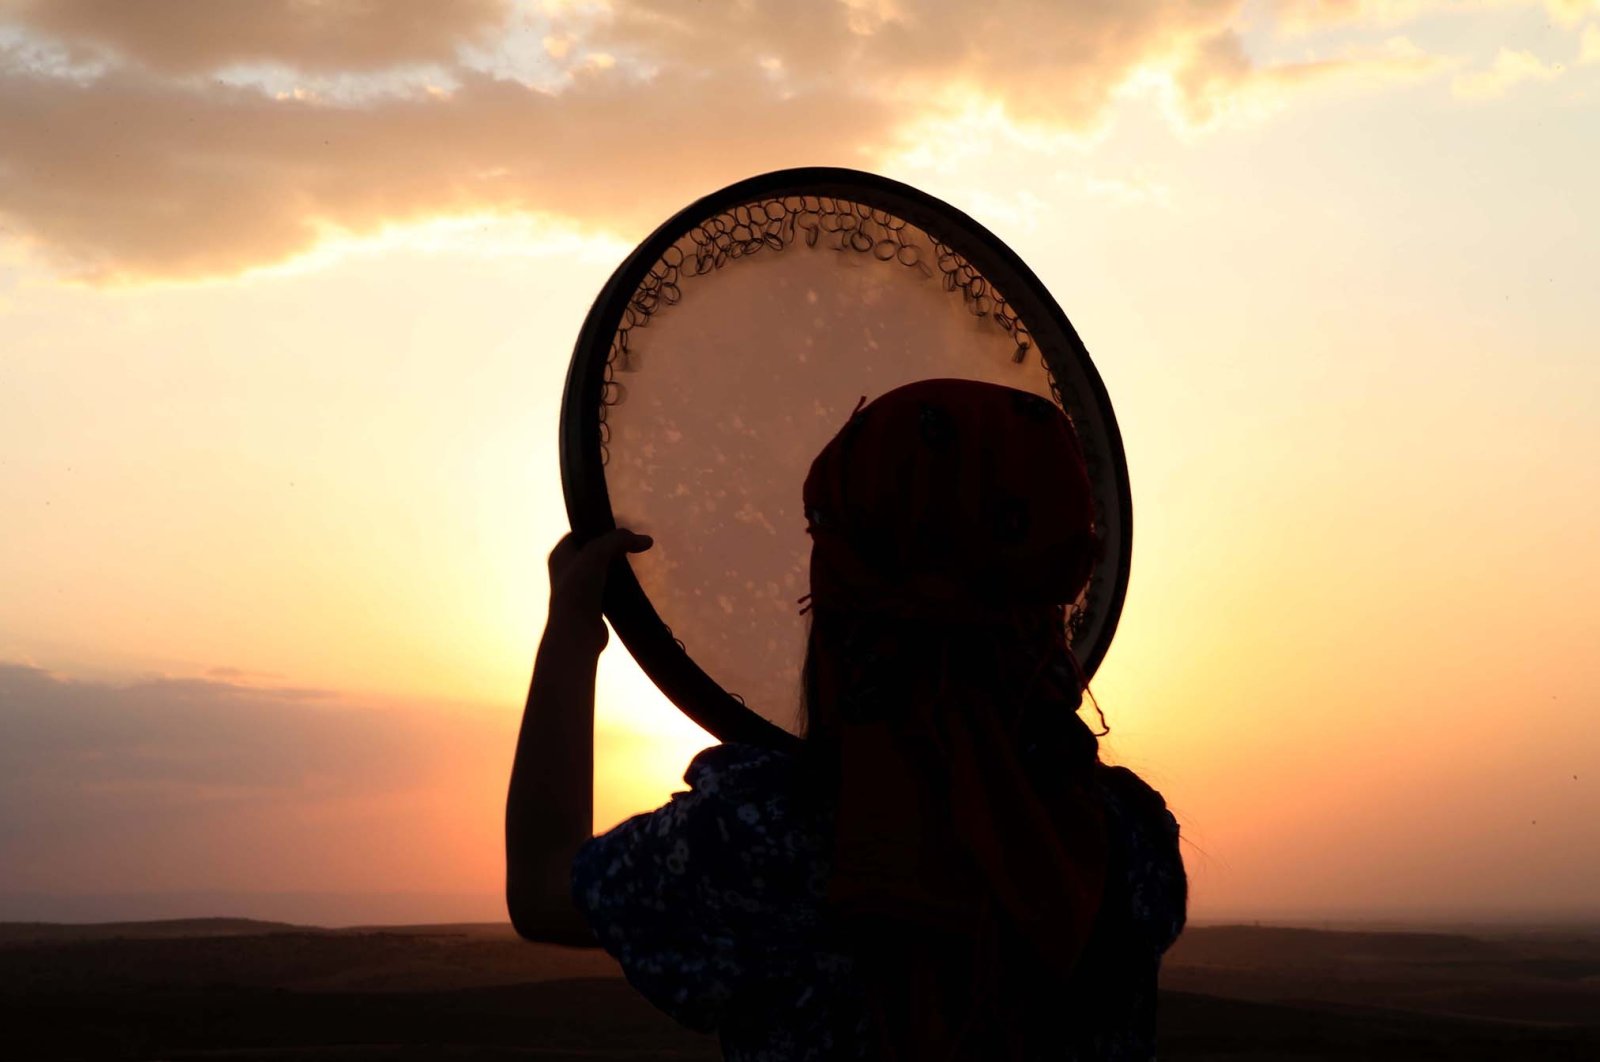 A woman holds a daf, a Middle Eastern frame drum musical instrument, as the sun sets upon the Zerzevan Castle, Diyarbakır, Turkey, July 31, 2021. (AA Photo)